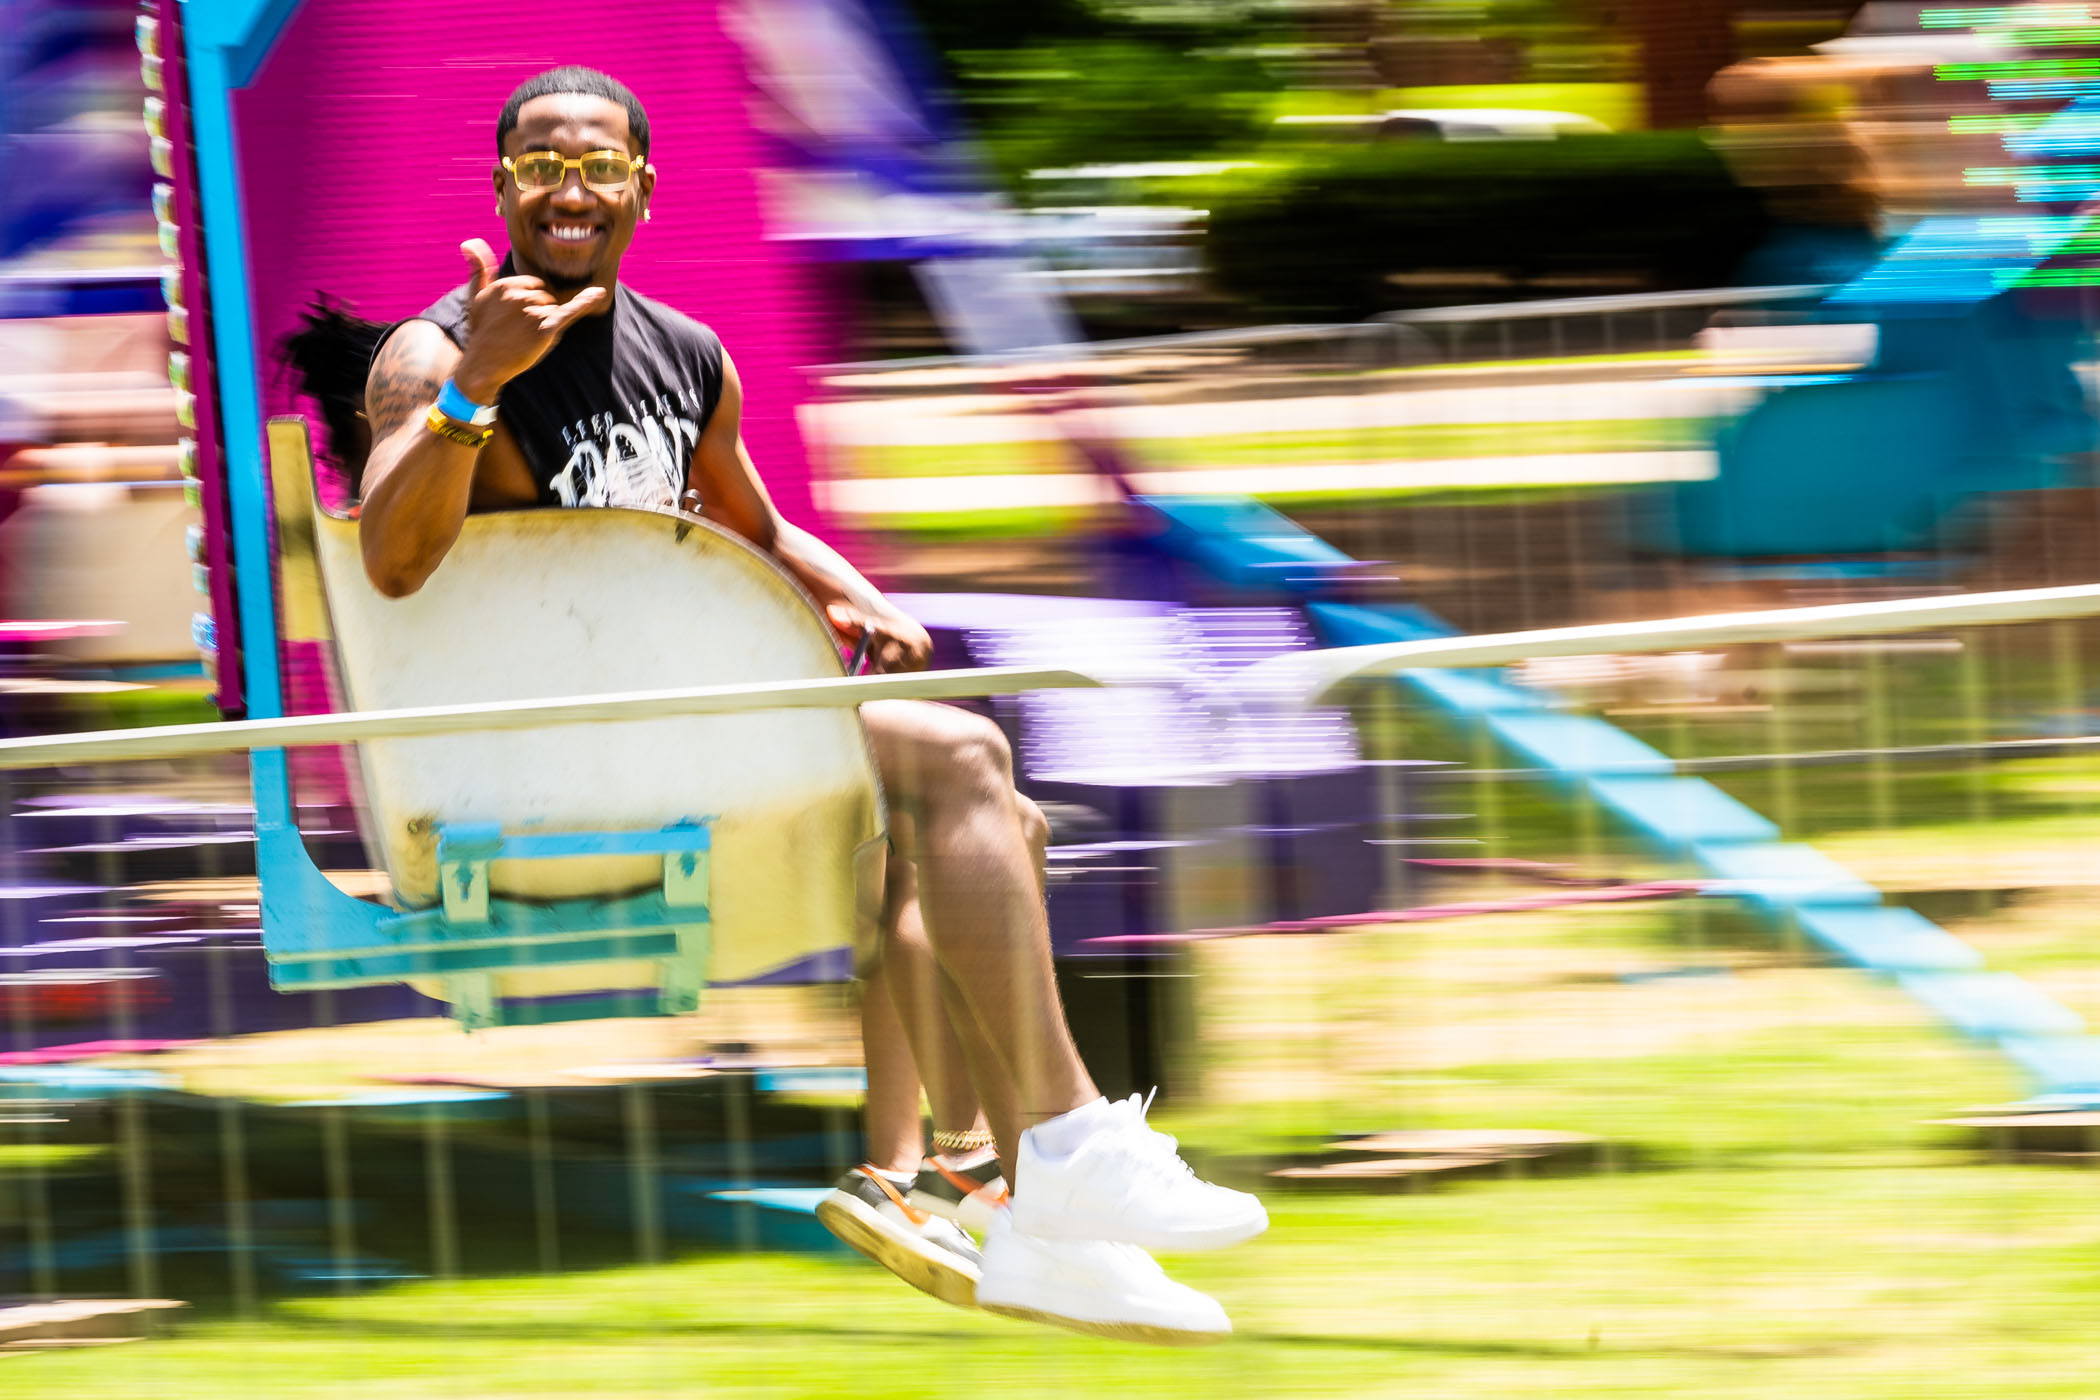 Isaac Watson, a senior industrial technology from Aberdeen, takes a quick spin on the Ballistic Swings ride at MSU&#039;s Last Day of Classes Carnival. Sponsored by the MSU Center for Student Activities and Department of Health Promotion and Wellness, the annual event celebrates the end of another successful semester with thrilling attractions, classic carnival-themed games and food, T-shirts, caricature artists fun with fellow Bulldogs in the Junction.